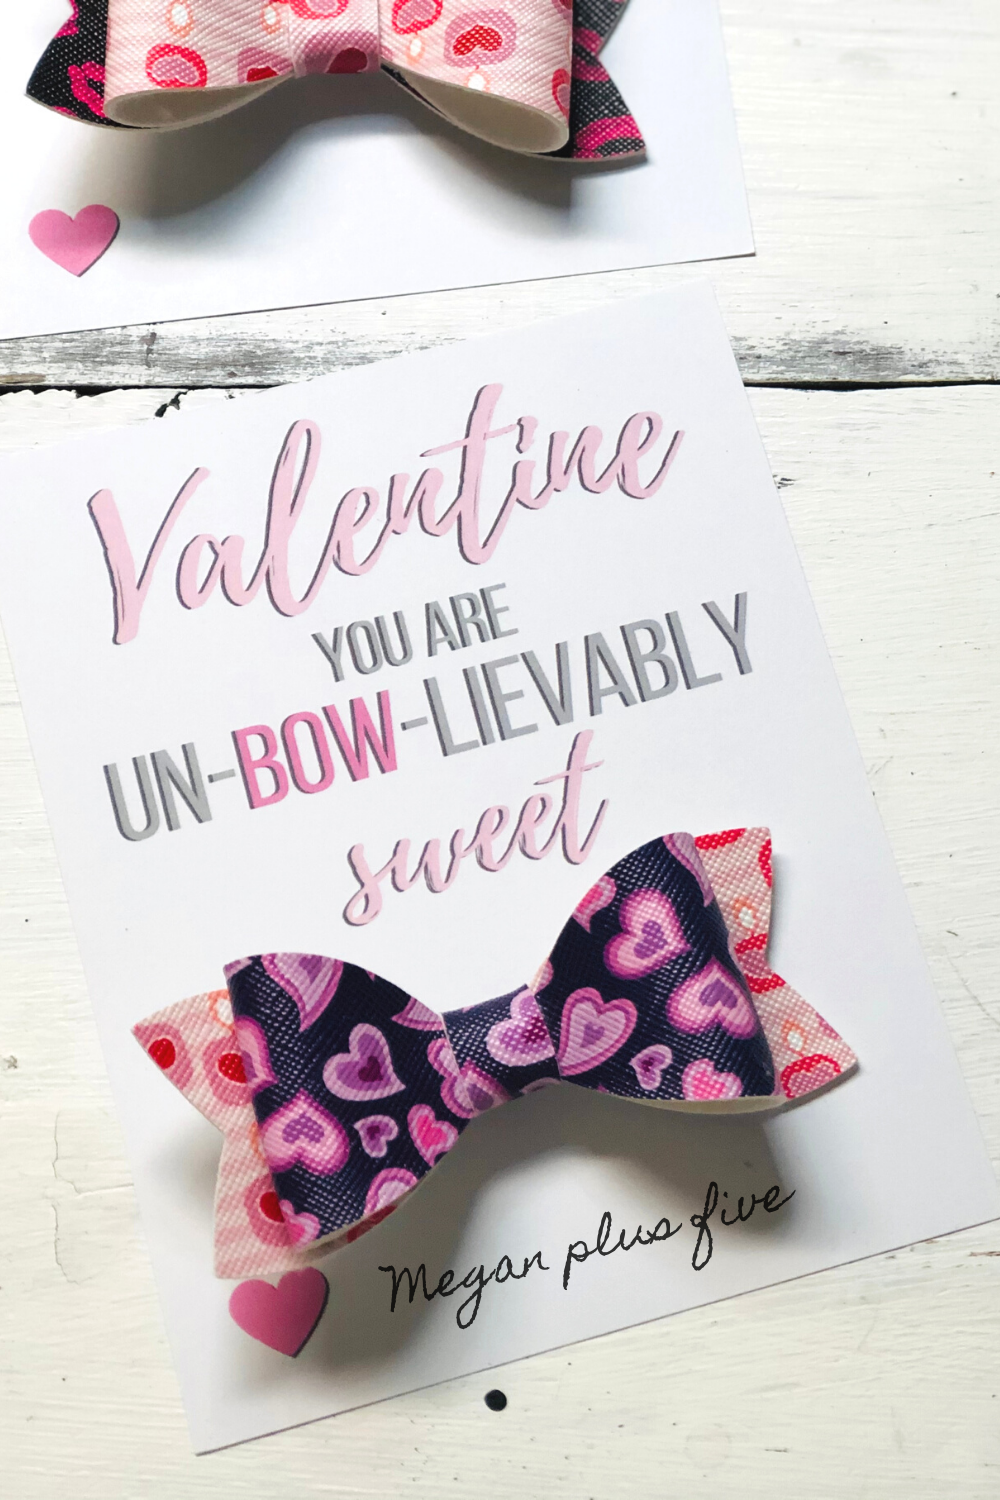 DIY faux leather hairbow using your Cricut. Free valentine printable for hairhows. Use your Cricut cutting machine to make adorable hair bows for your girls.